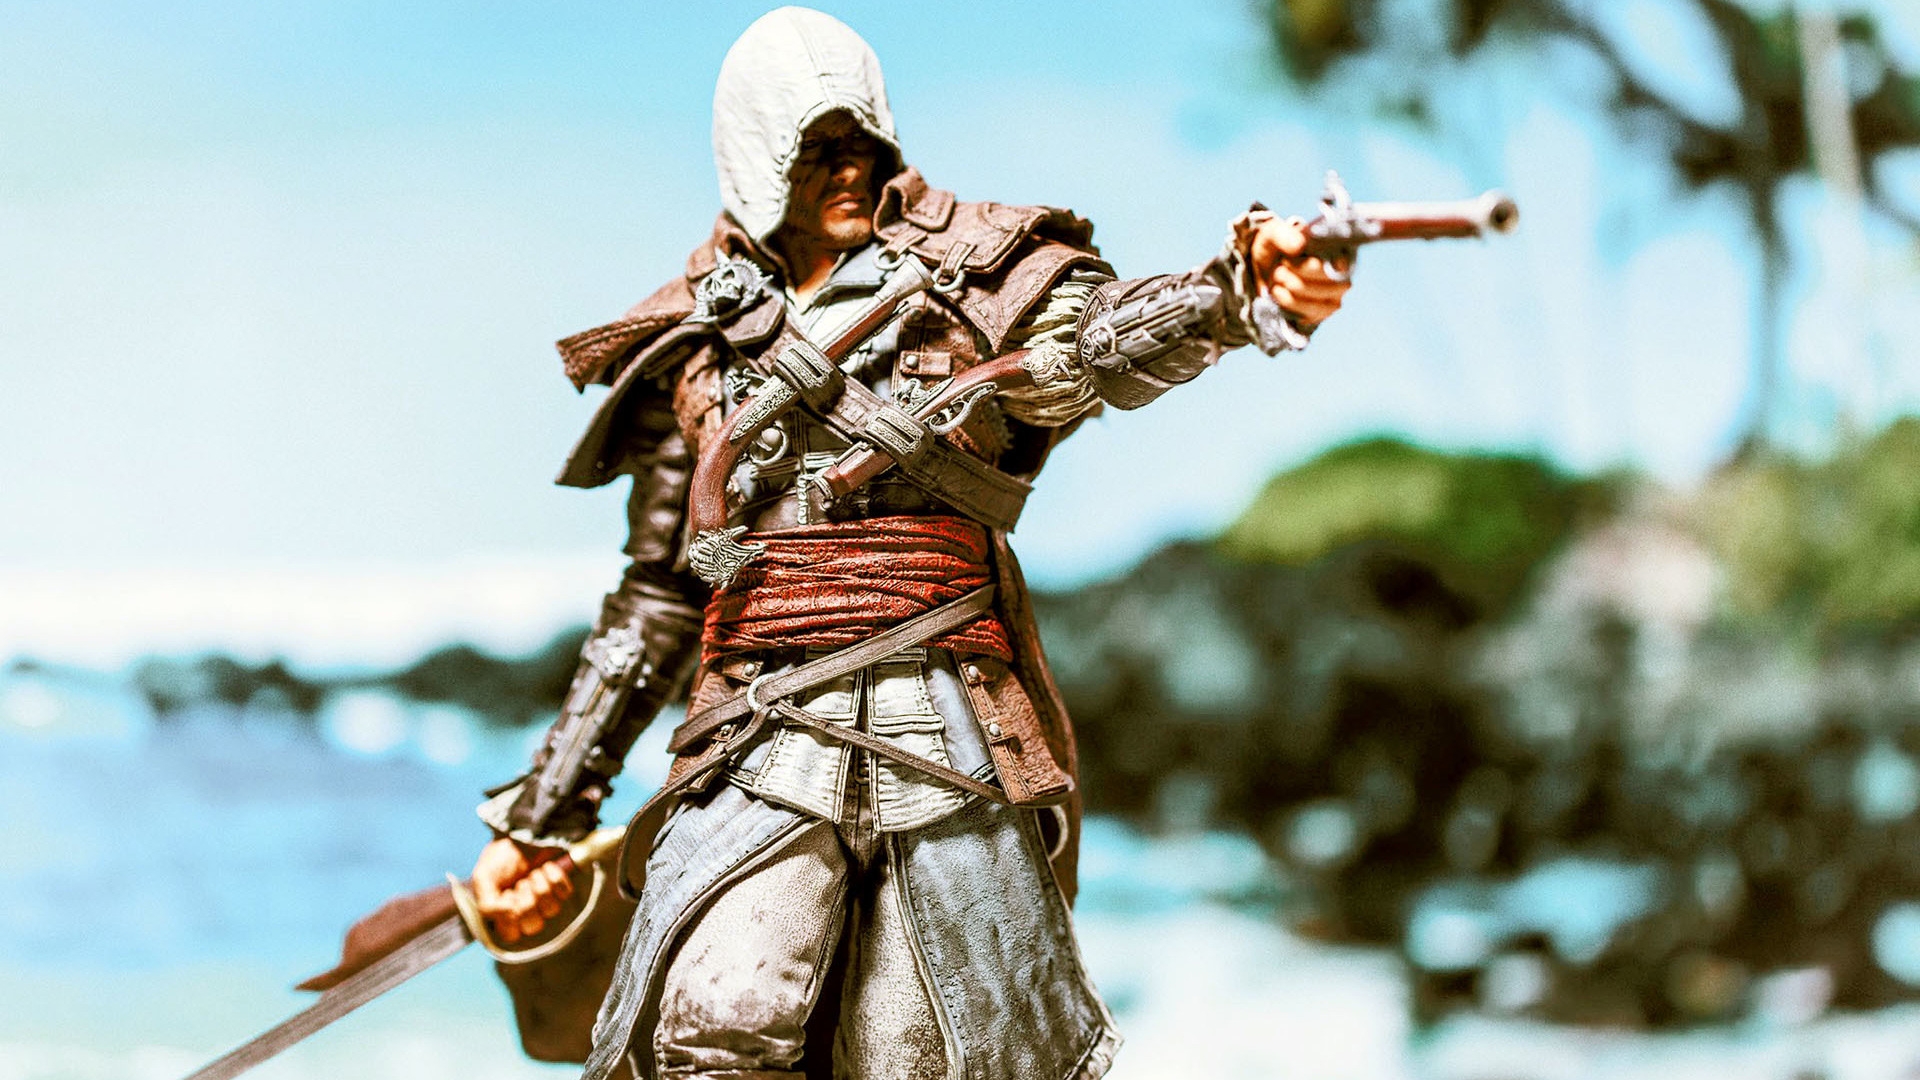 Assassin Creed Black Flag Character for 1920 x 1080 HDTV 1080p resolution